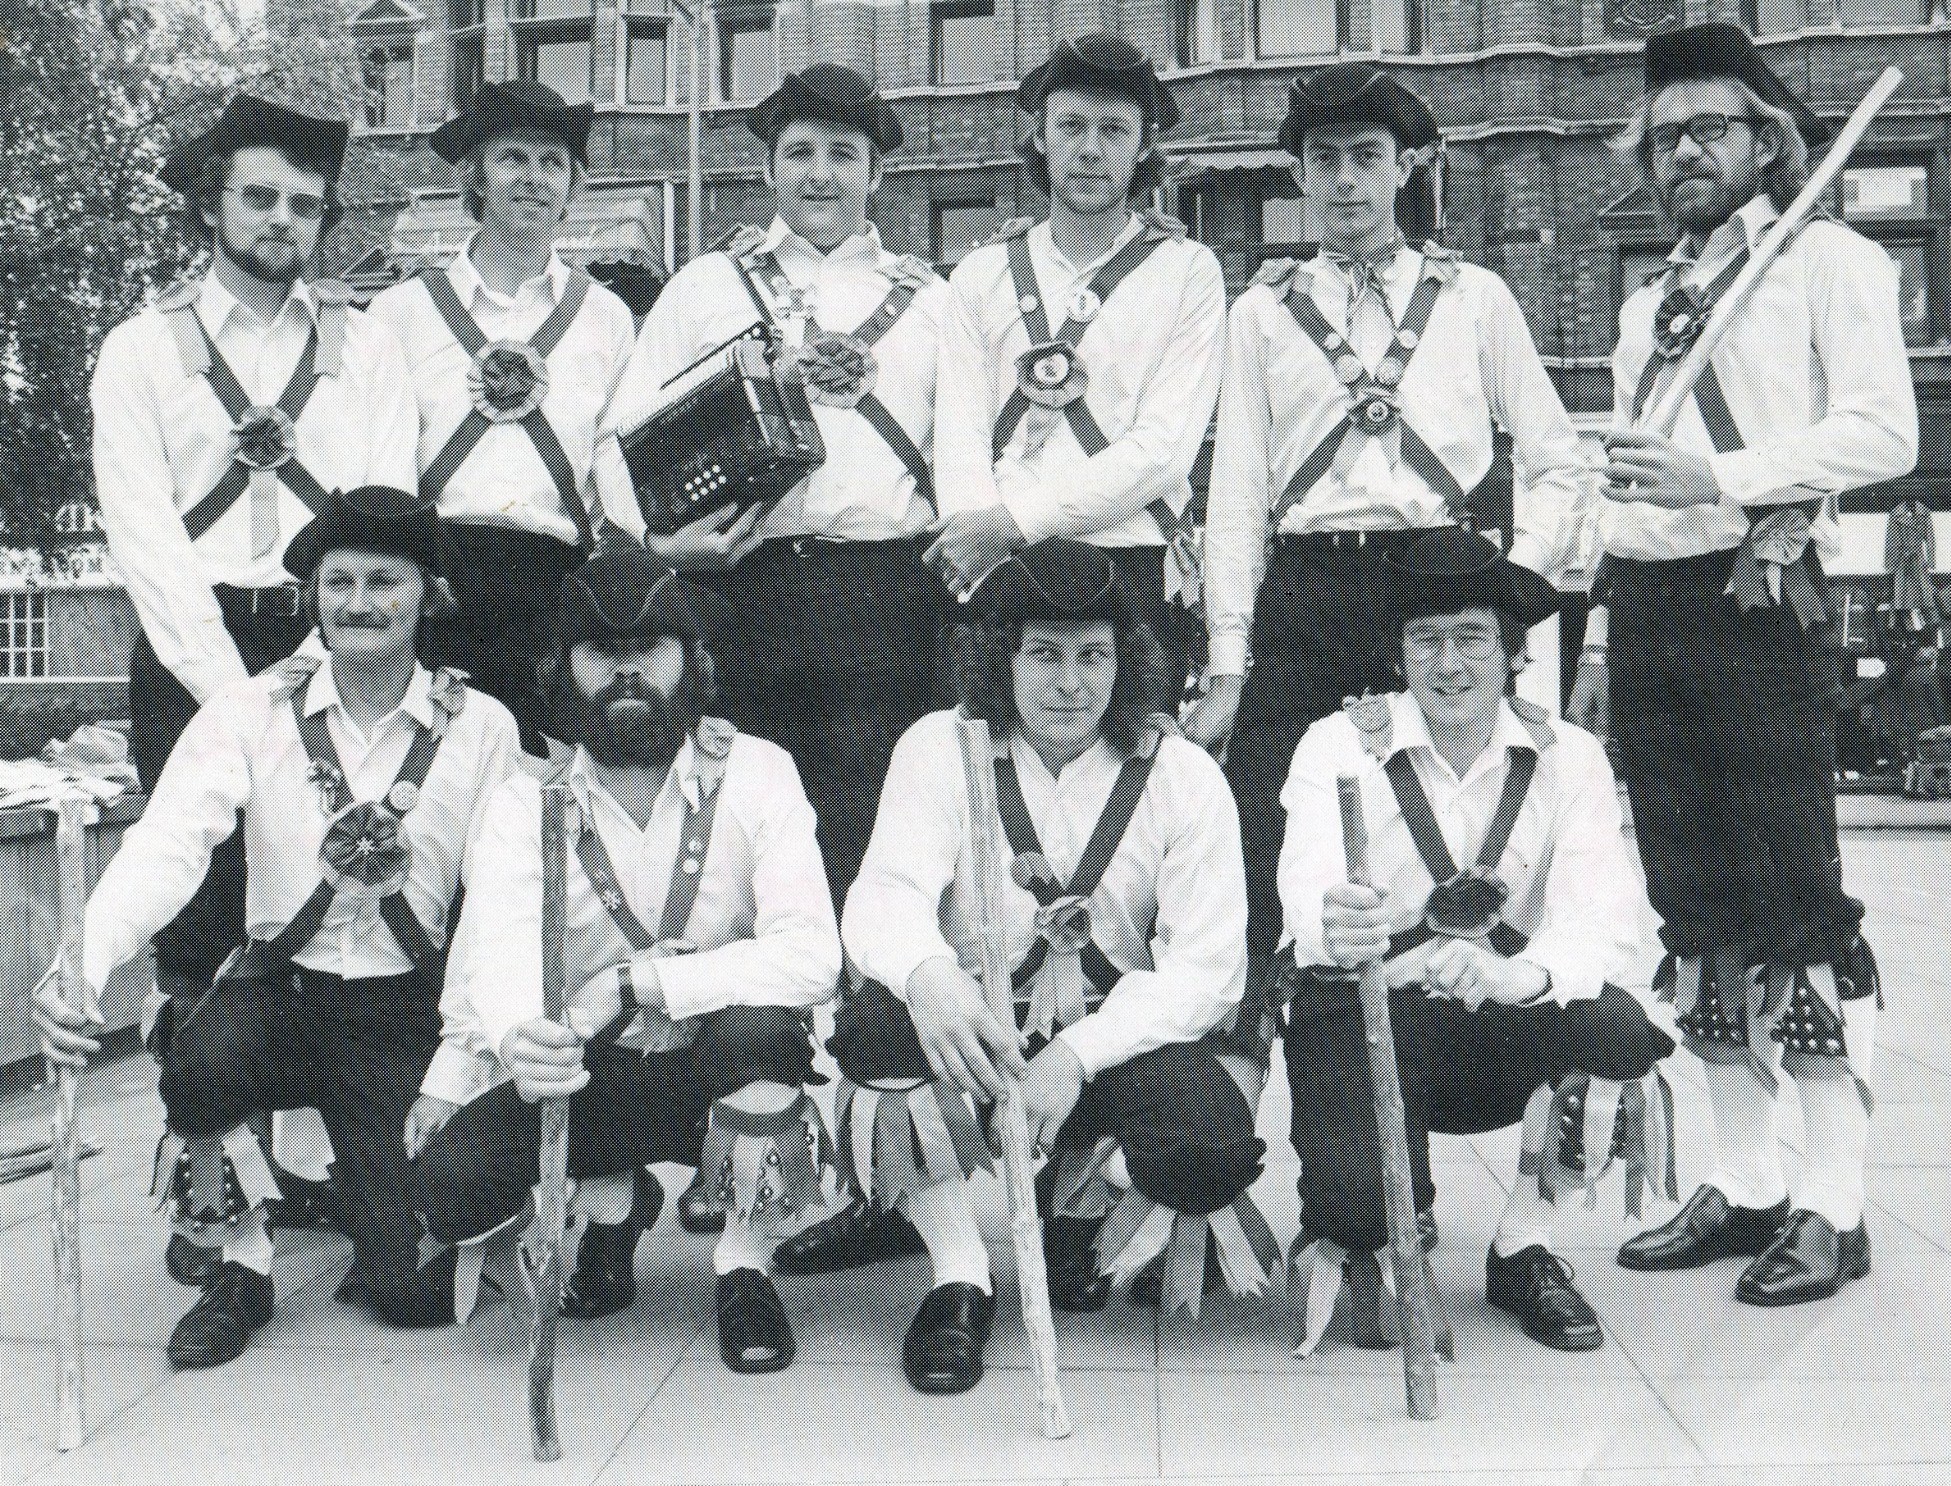 MusPics Pete in Northampton Morris kit about 1968 or 1969